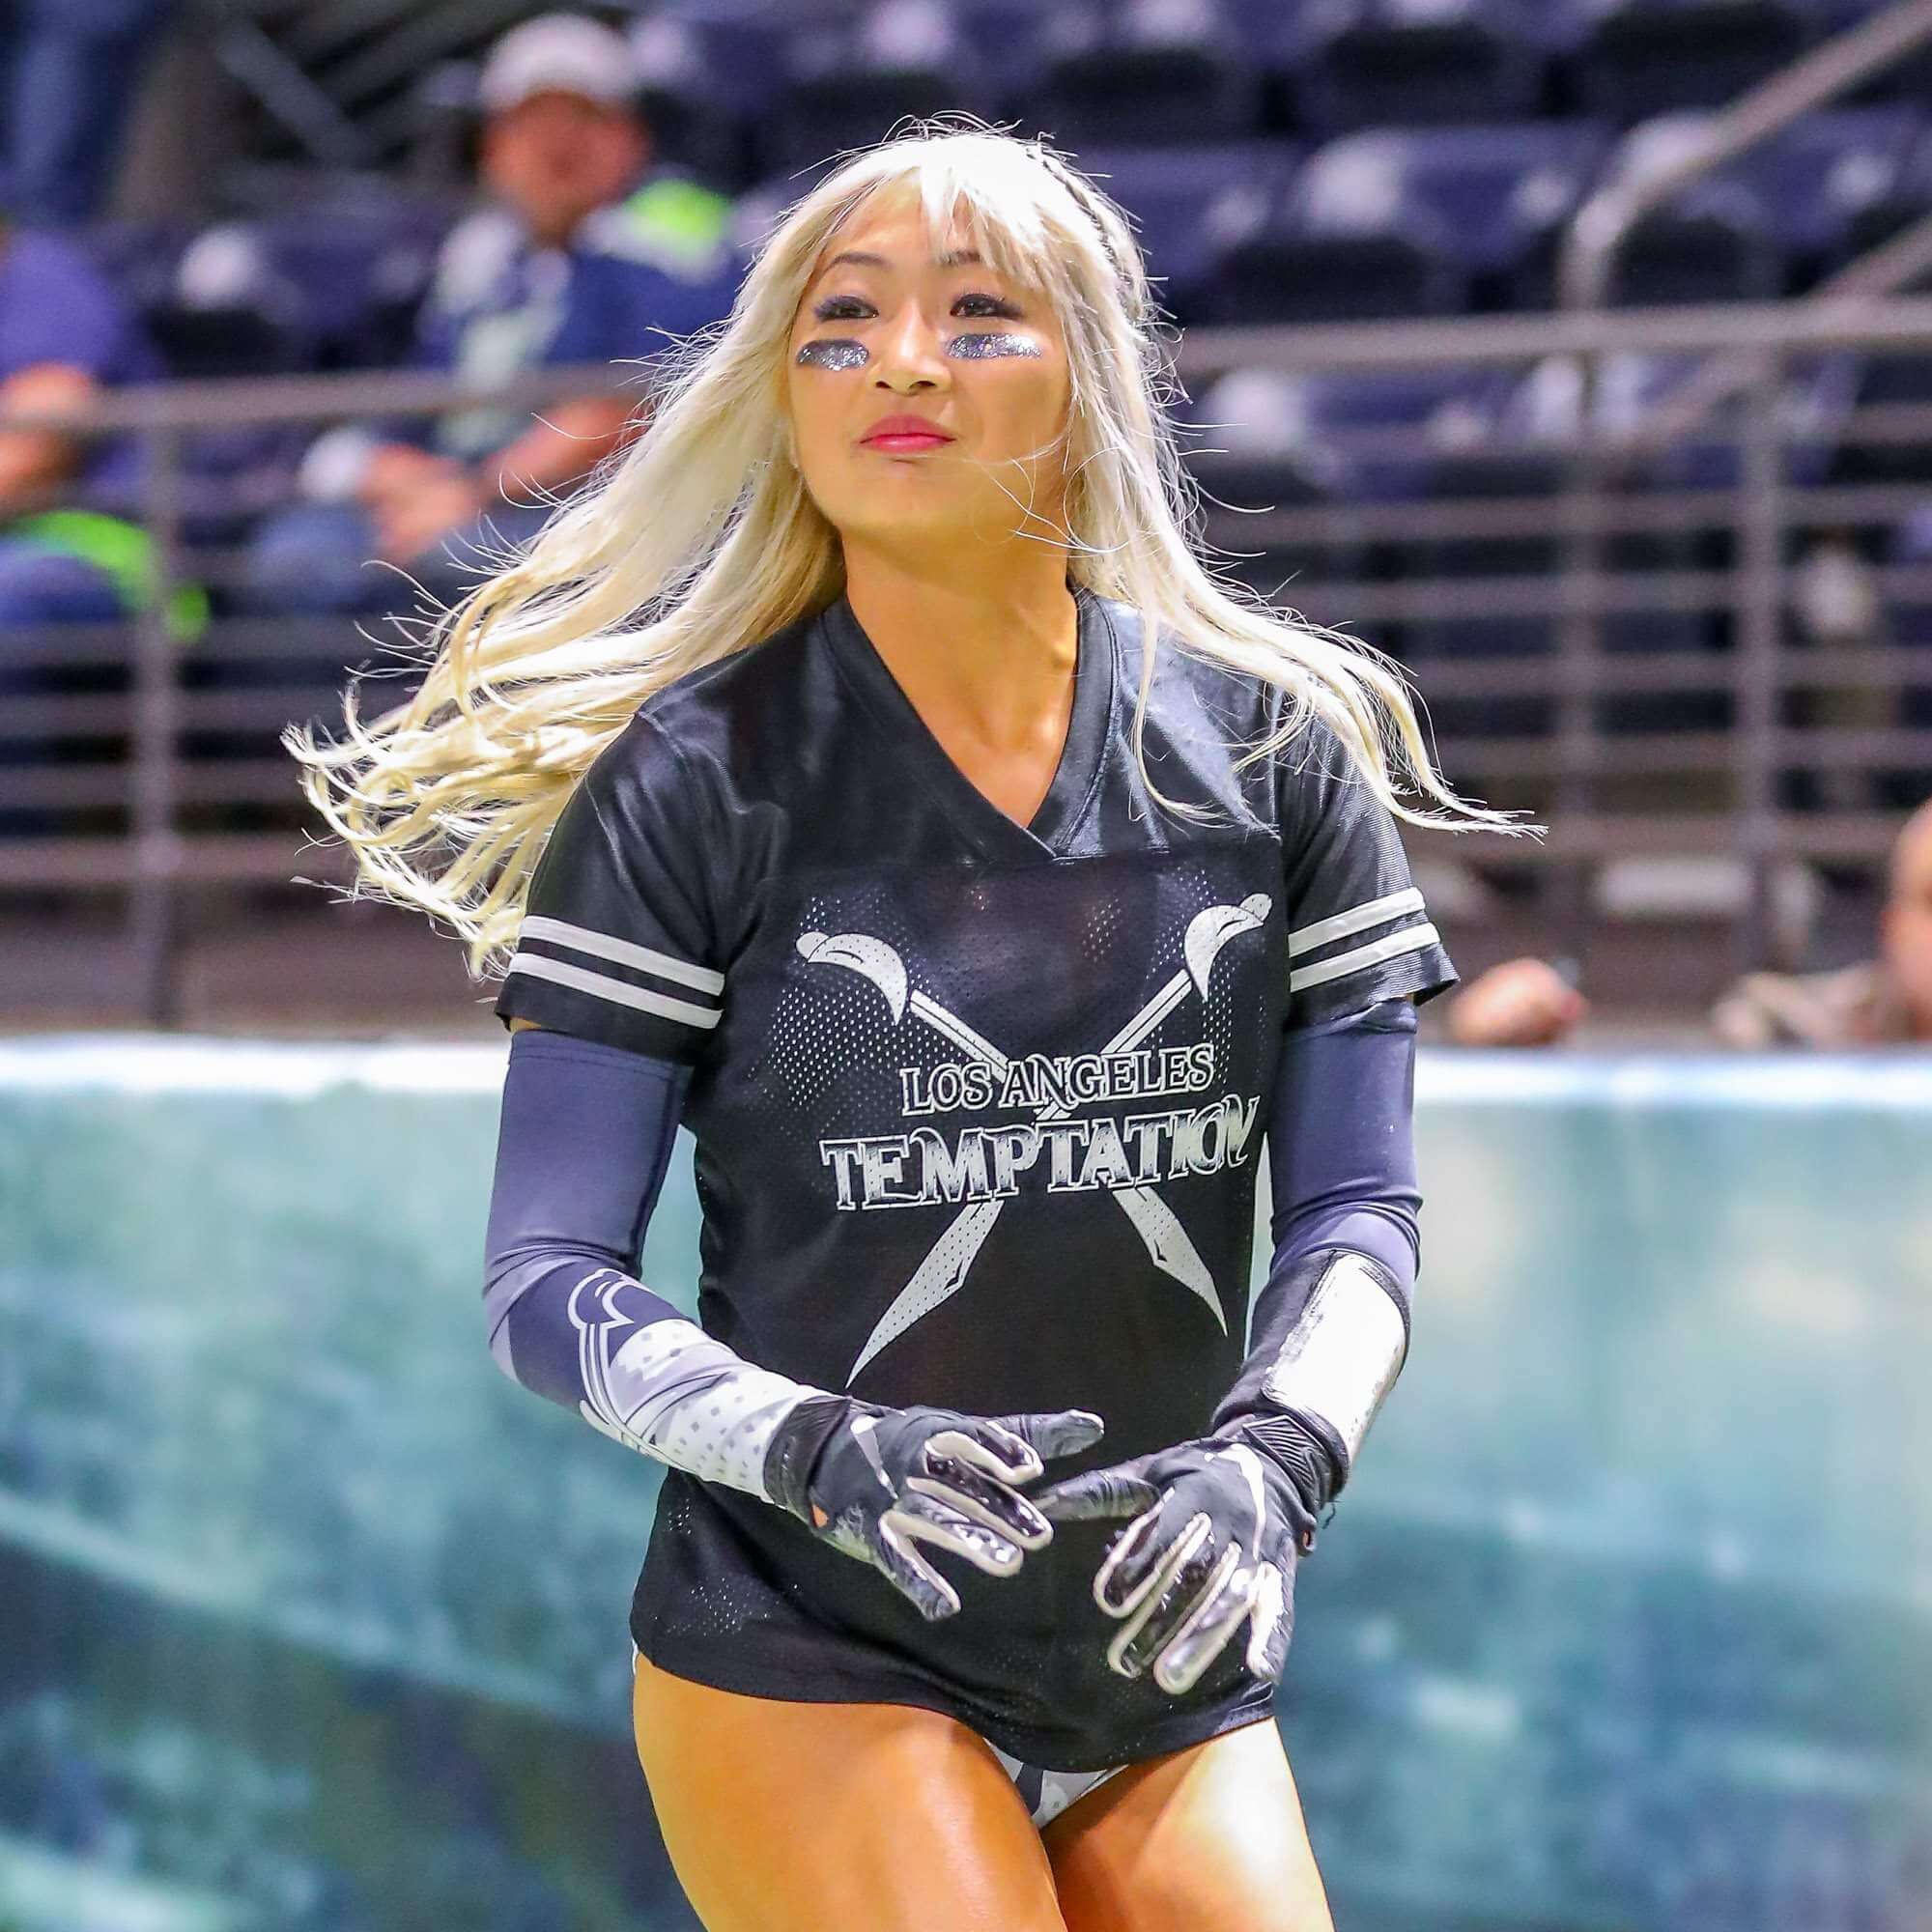 The Legends Football League Beautiful Women And Football, Need We Say Anymore! 169